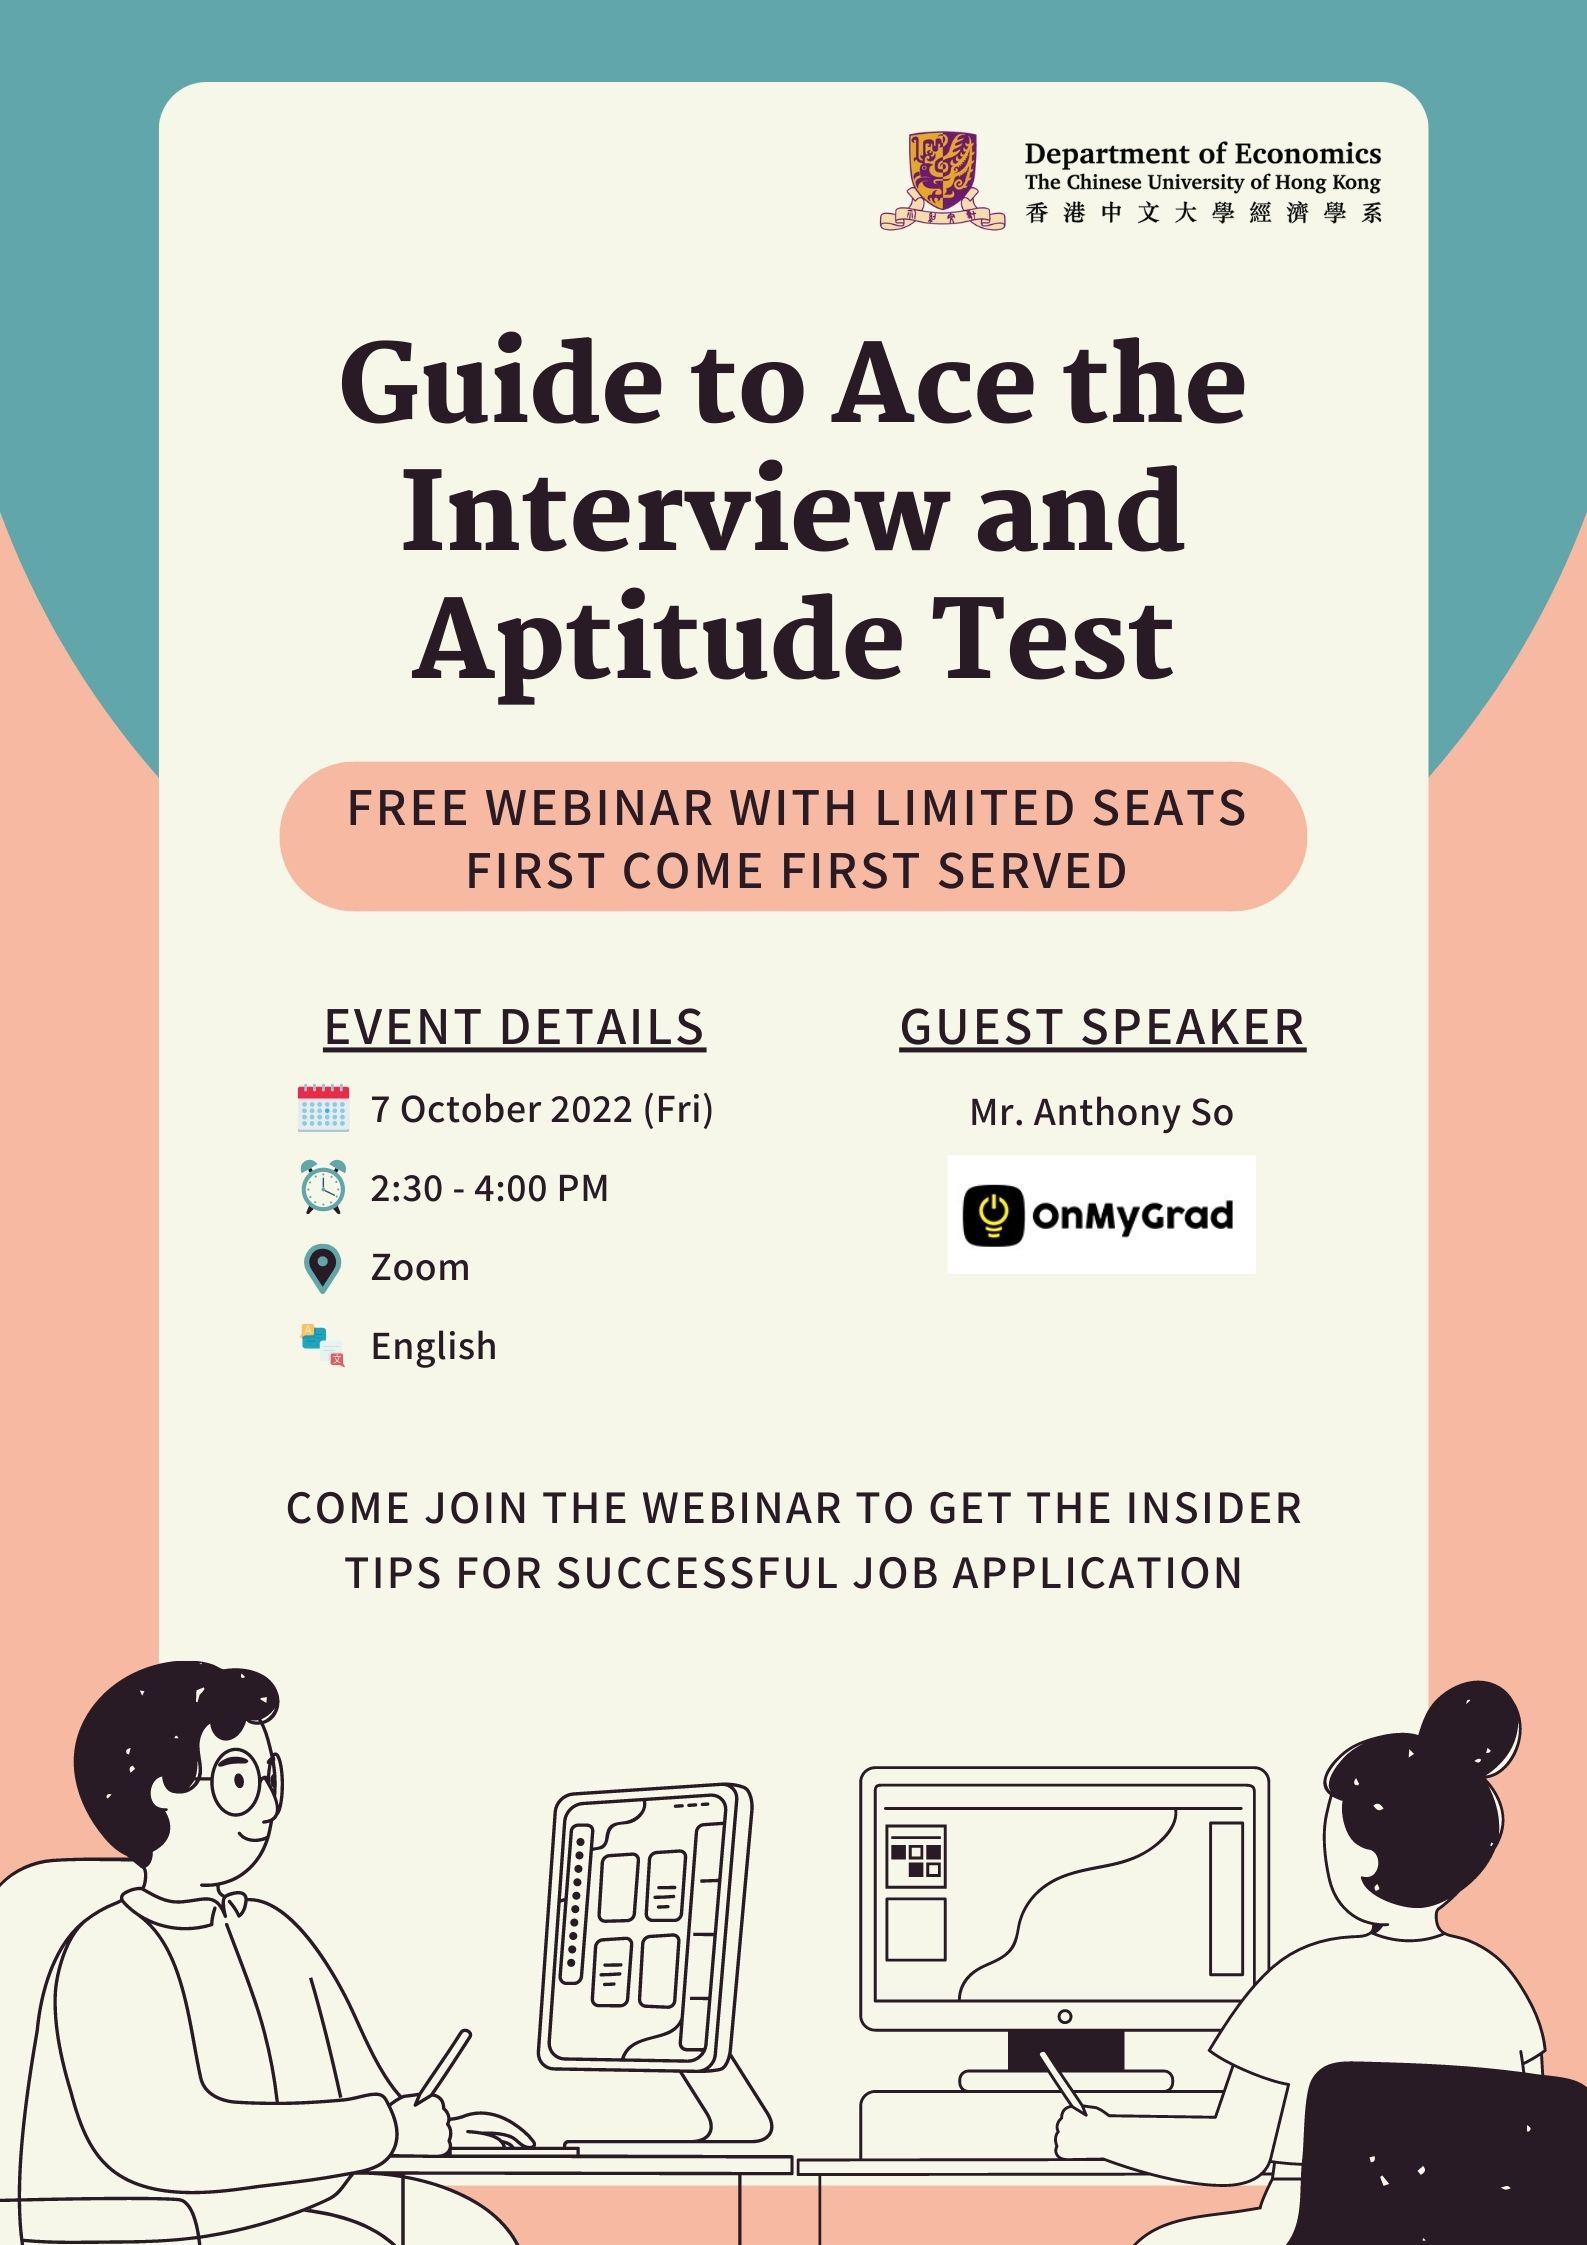 Guide to Ace the Interview and Aptitude Test on 9 Sep 2022